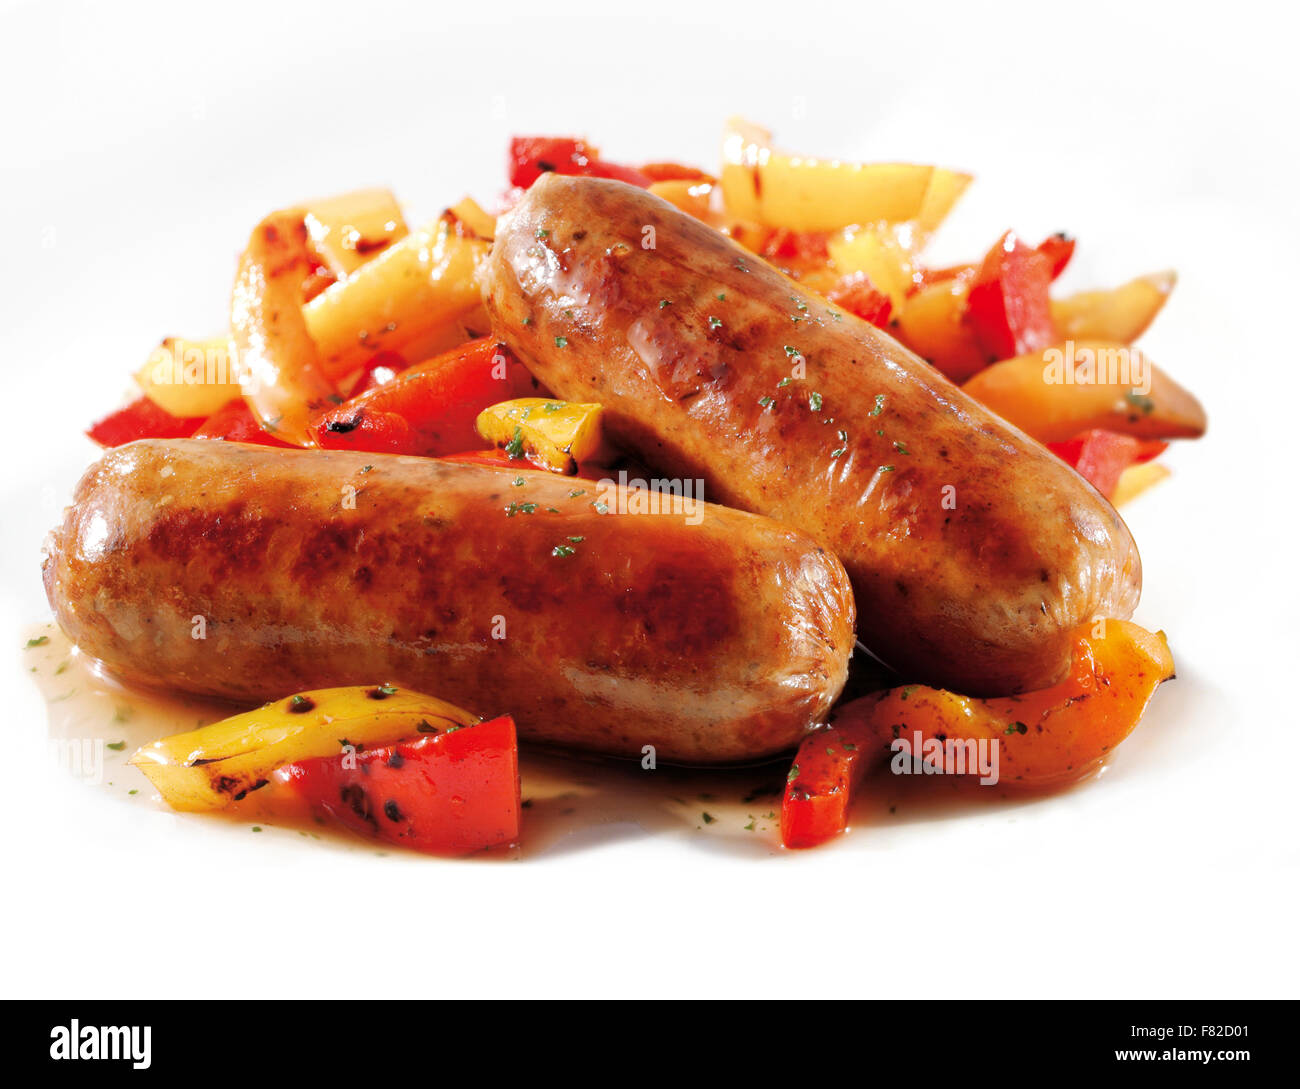 Traditional cooked pork sausage with roast peppers Stock Photo